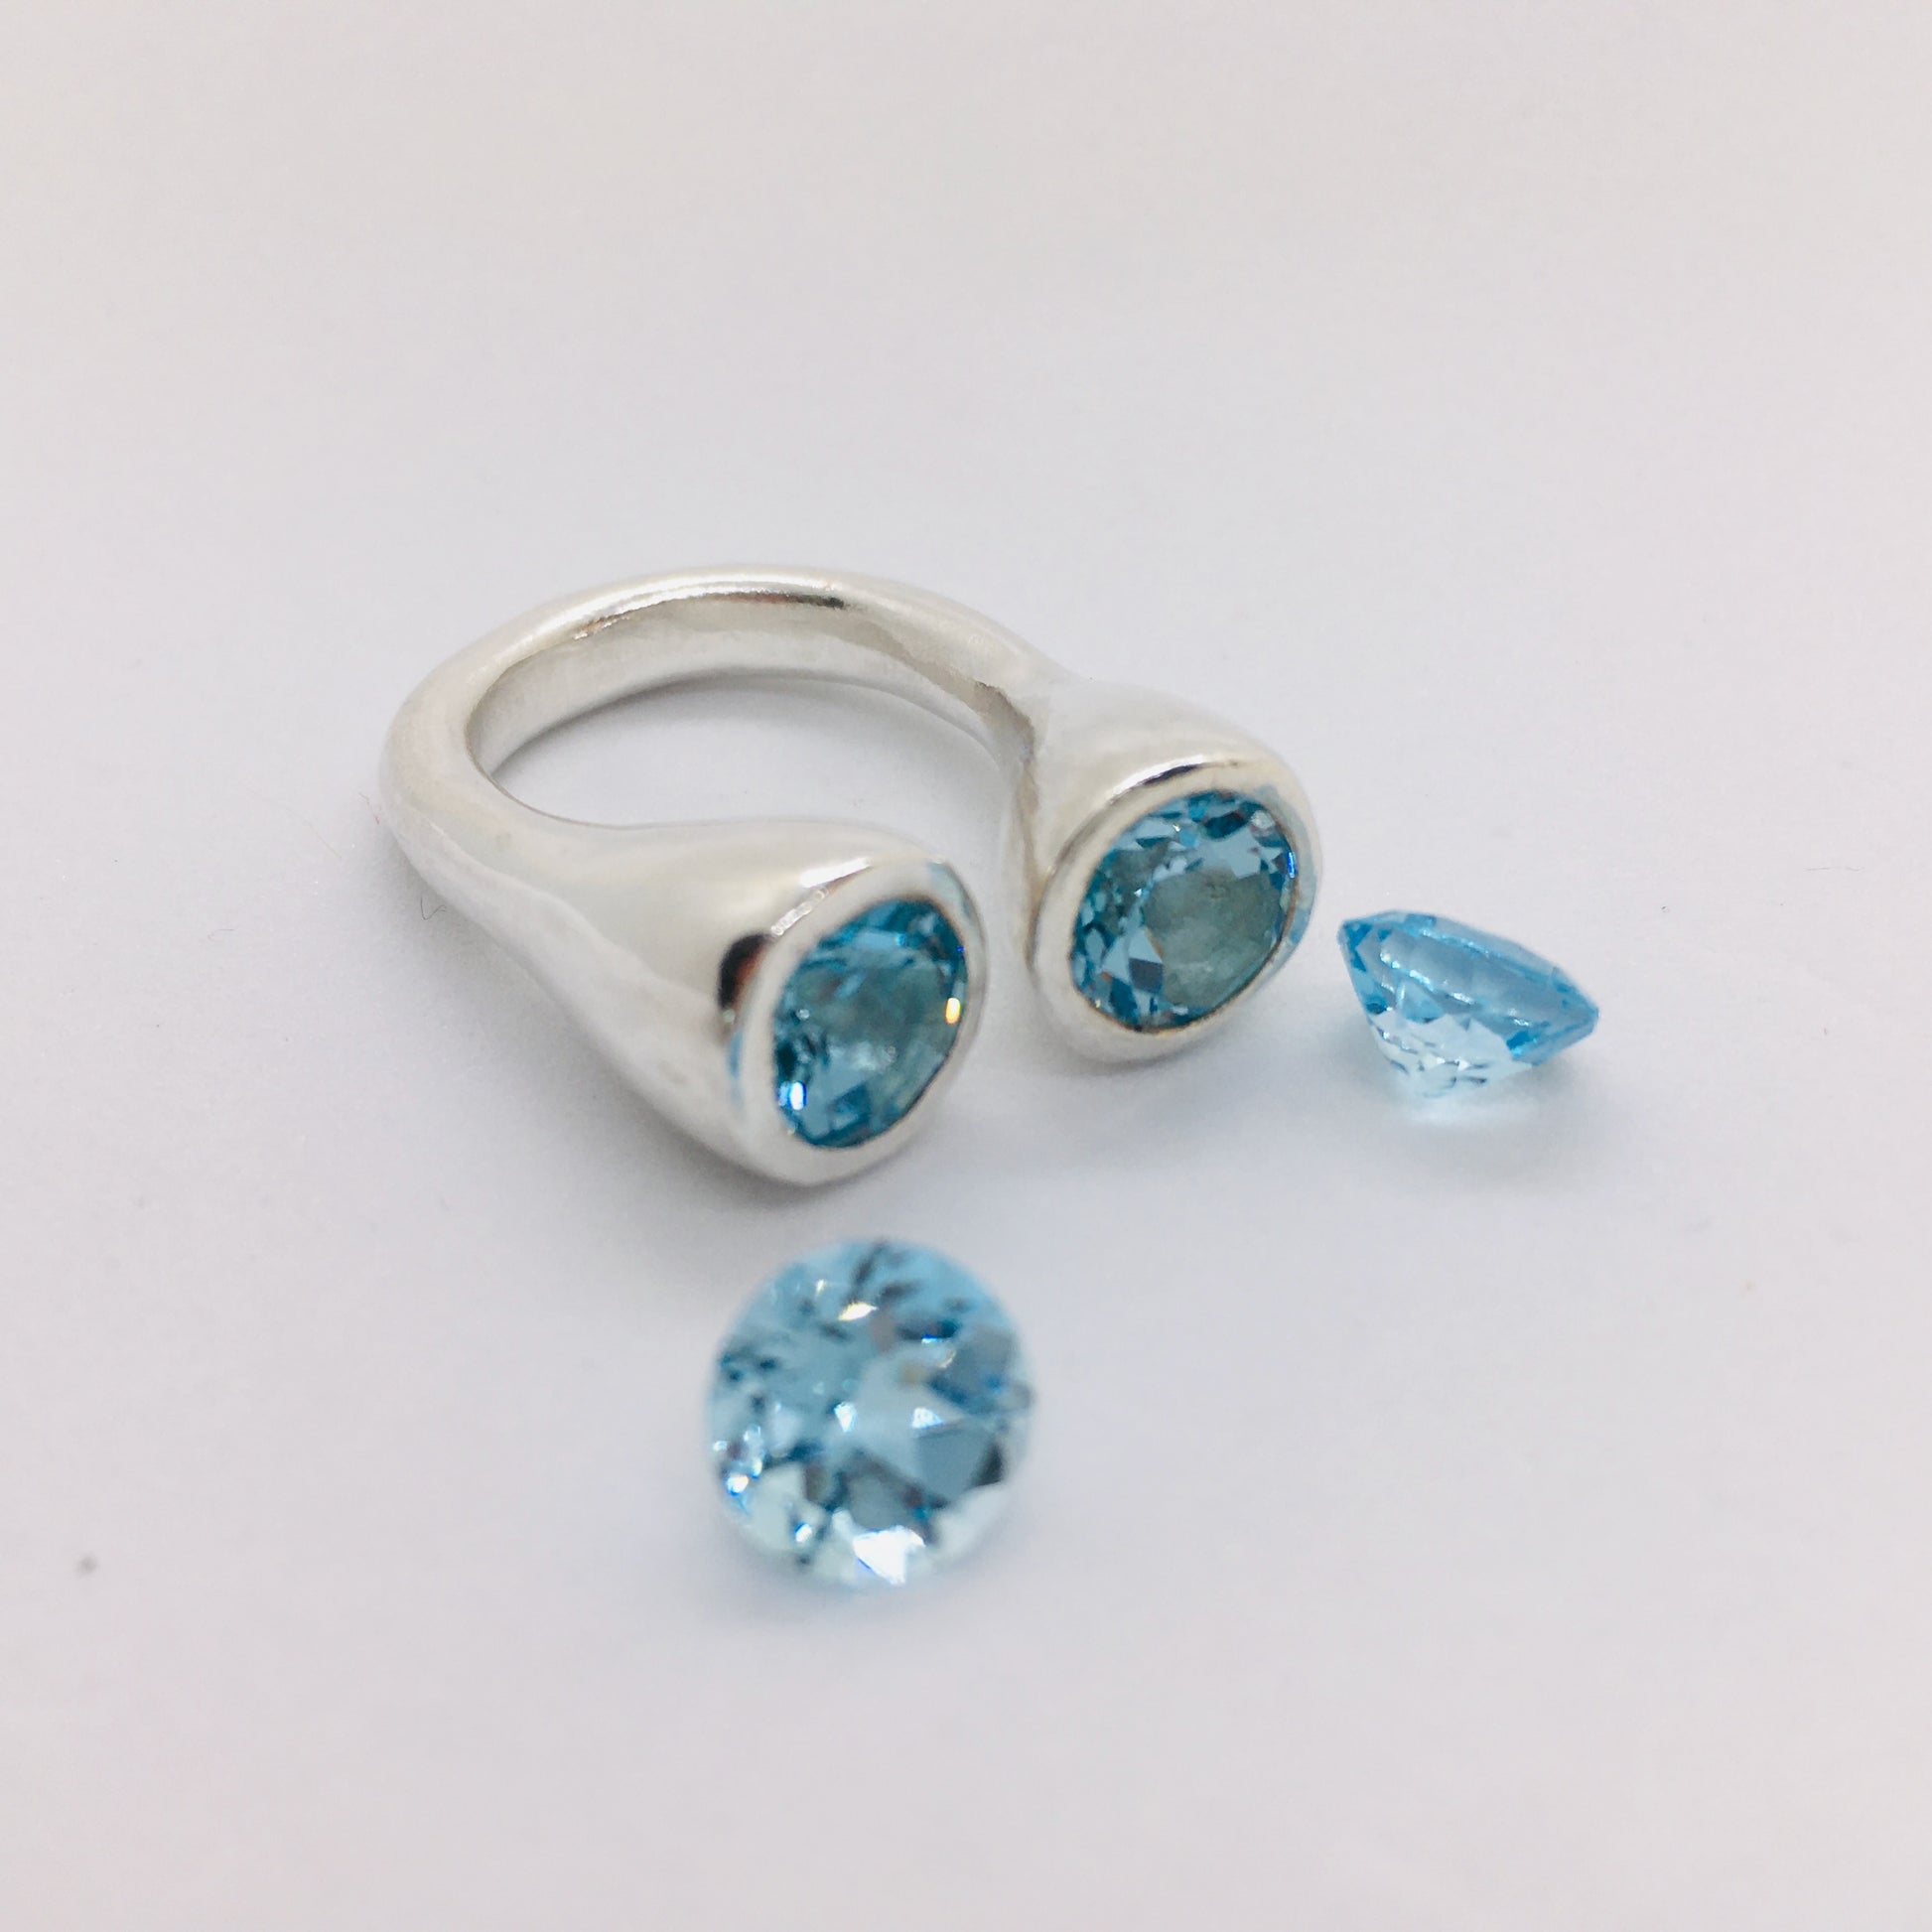 Gum Nut Sterling Silver Ring with Blue Topaz